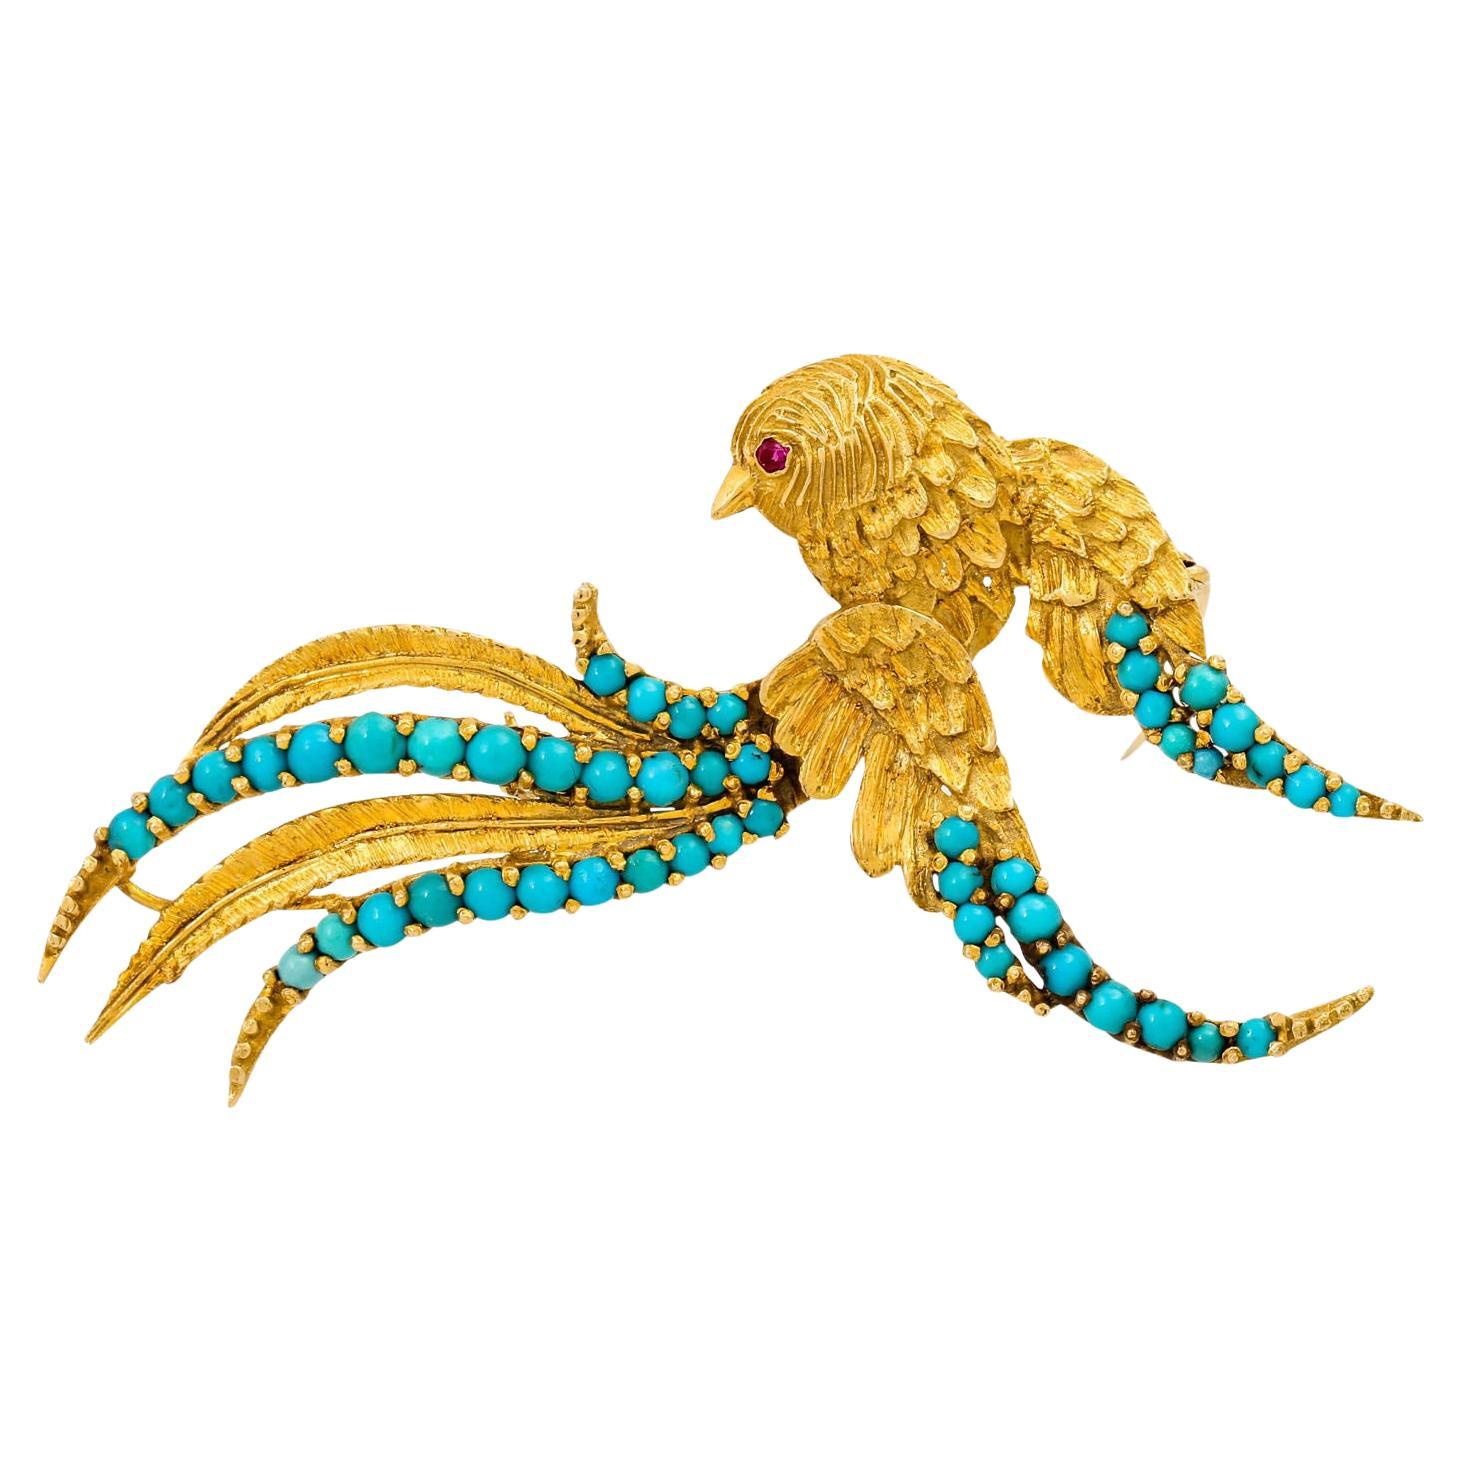 Brooch "Fantasy Bird" with Turquoise in a Fine Color For Sale